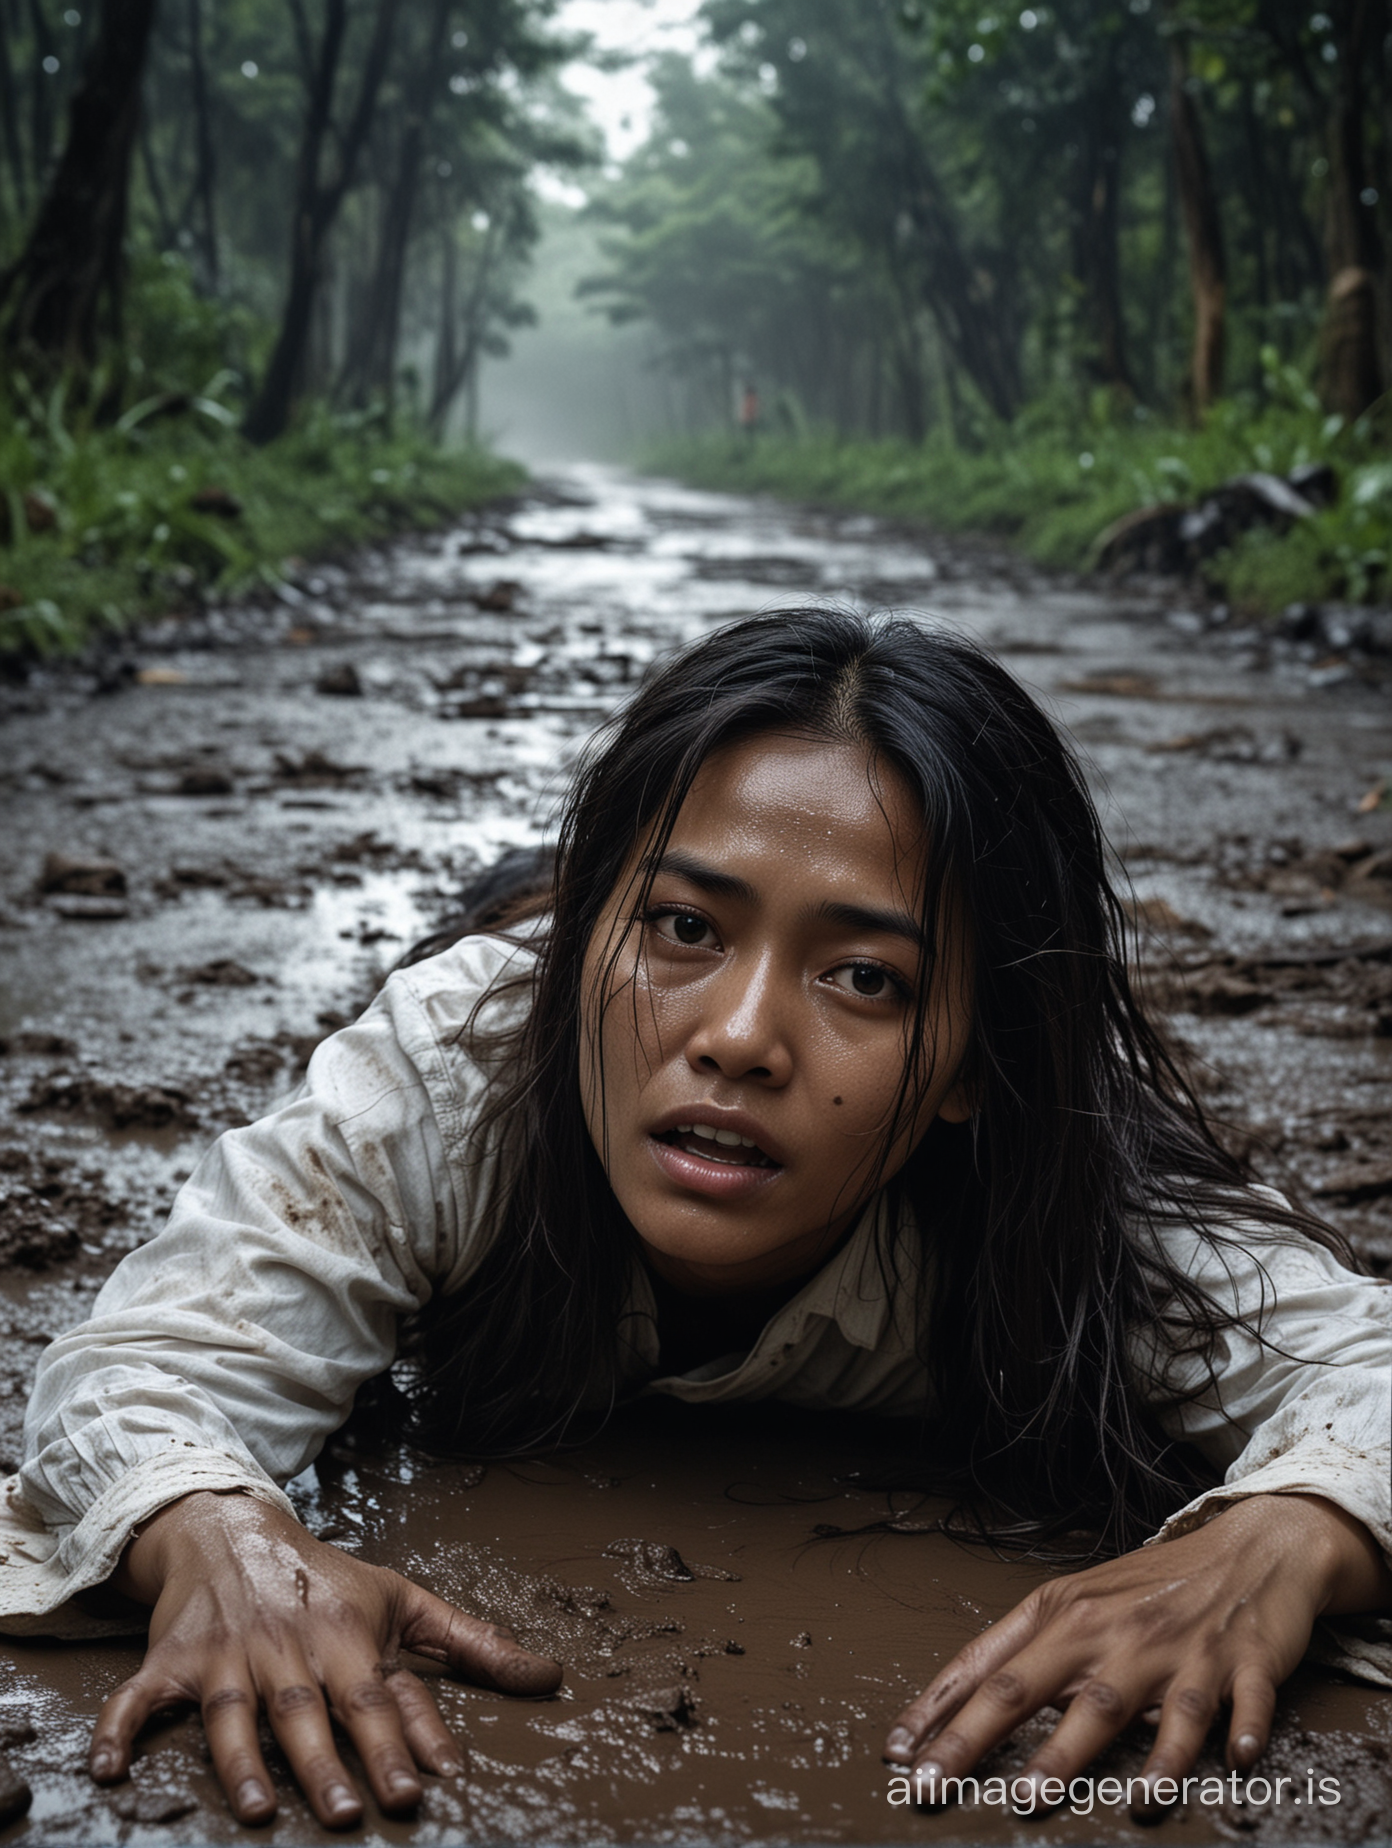 Low angle. Movie poster an indonesian women, mesy long hair,she lying on her stomach on a muddy road.in the dark night.with a stained face and outstreched arms,she wesringva long worn white shirt that was dirty and wet.her face showed pain and she ask for help by reaching her hand forward but sone people in there are  not care.cinenatic,gloomy,dark fantasy,mystical